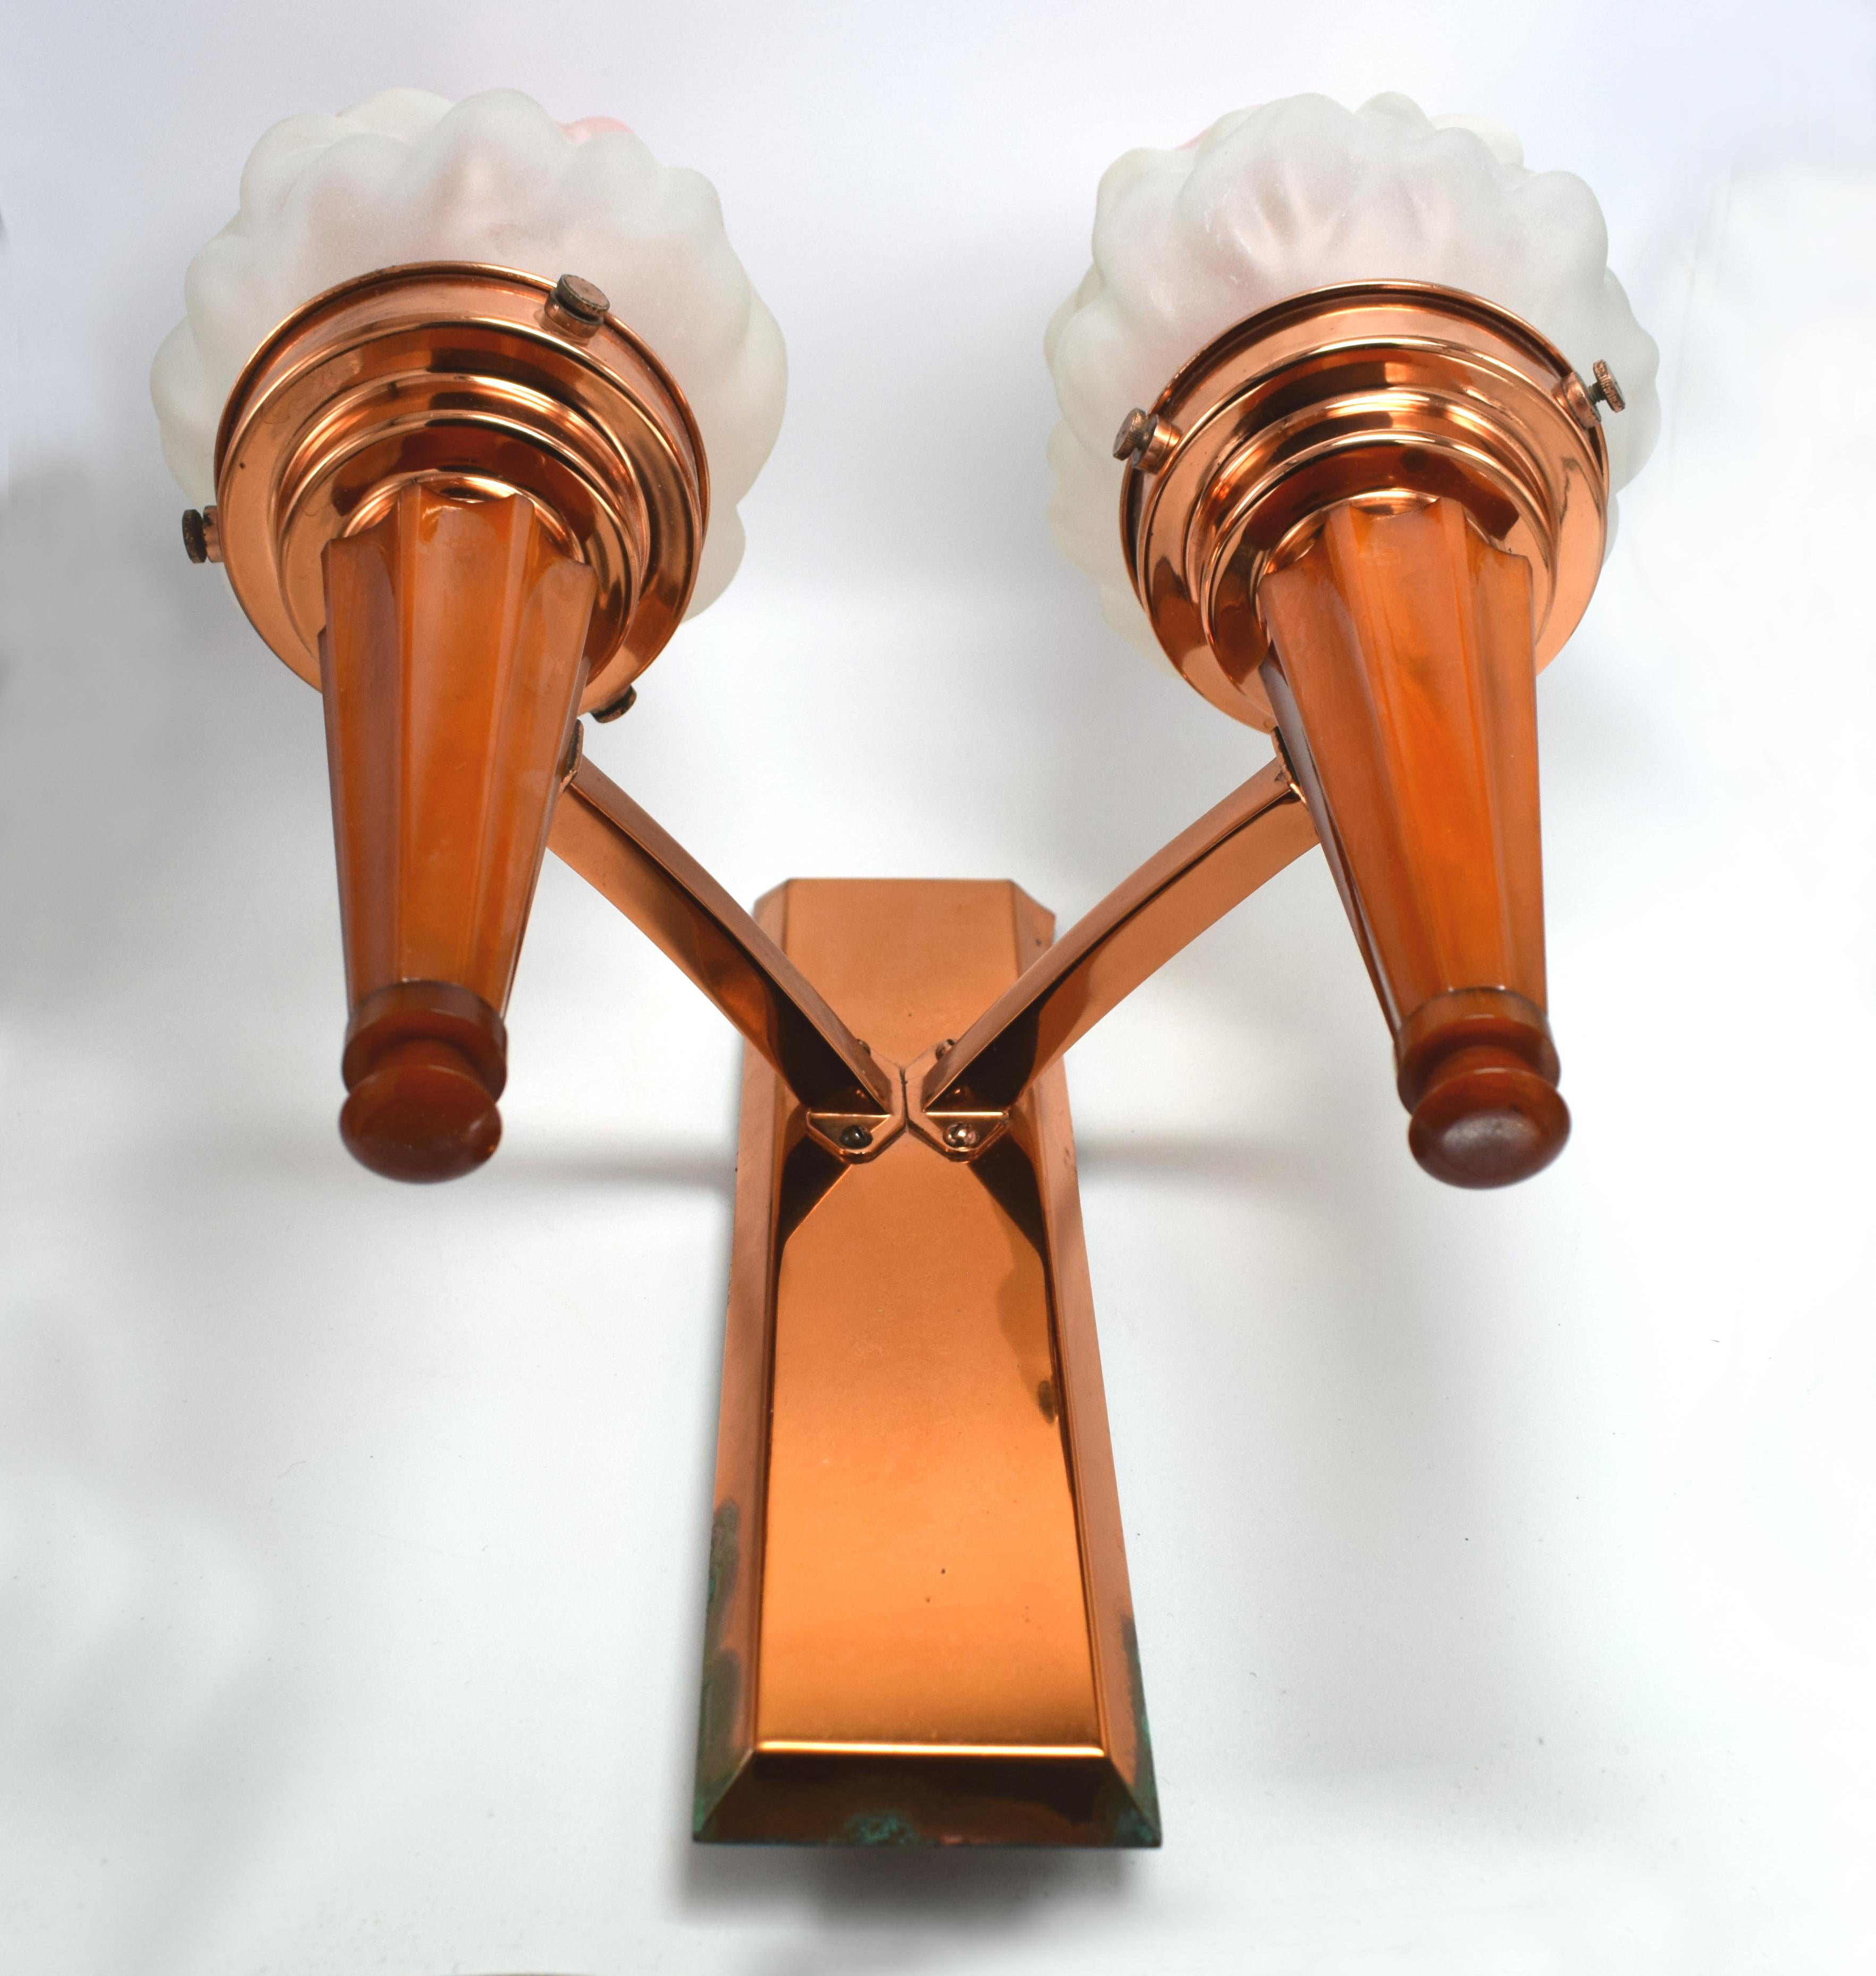 Matching Pair of Art Deco Double Flame Wall Light Sconces, circa 1930s In Good Condition For Sale In Devon, England